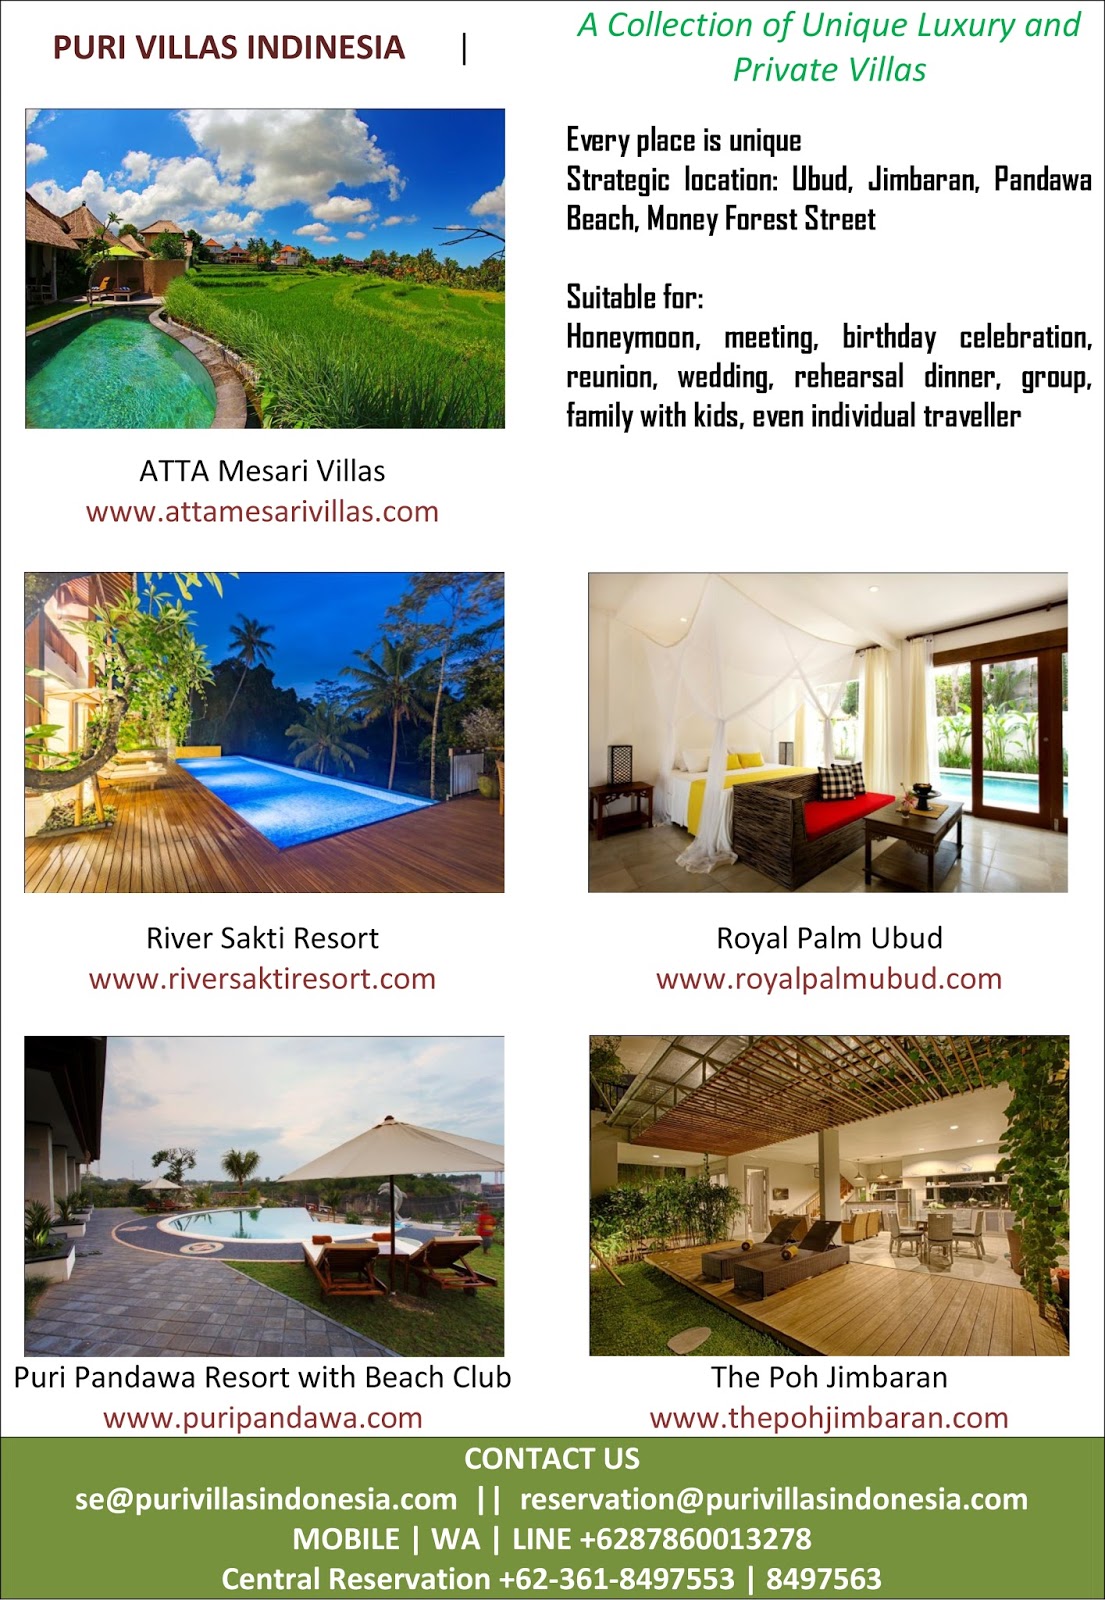 Bali Educational Tour Serice: Here are 5 best villa in Bali for holiday